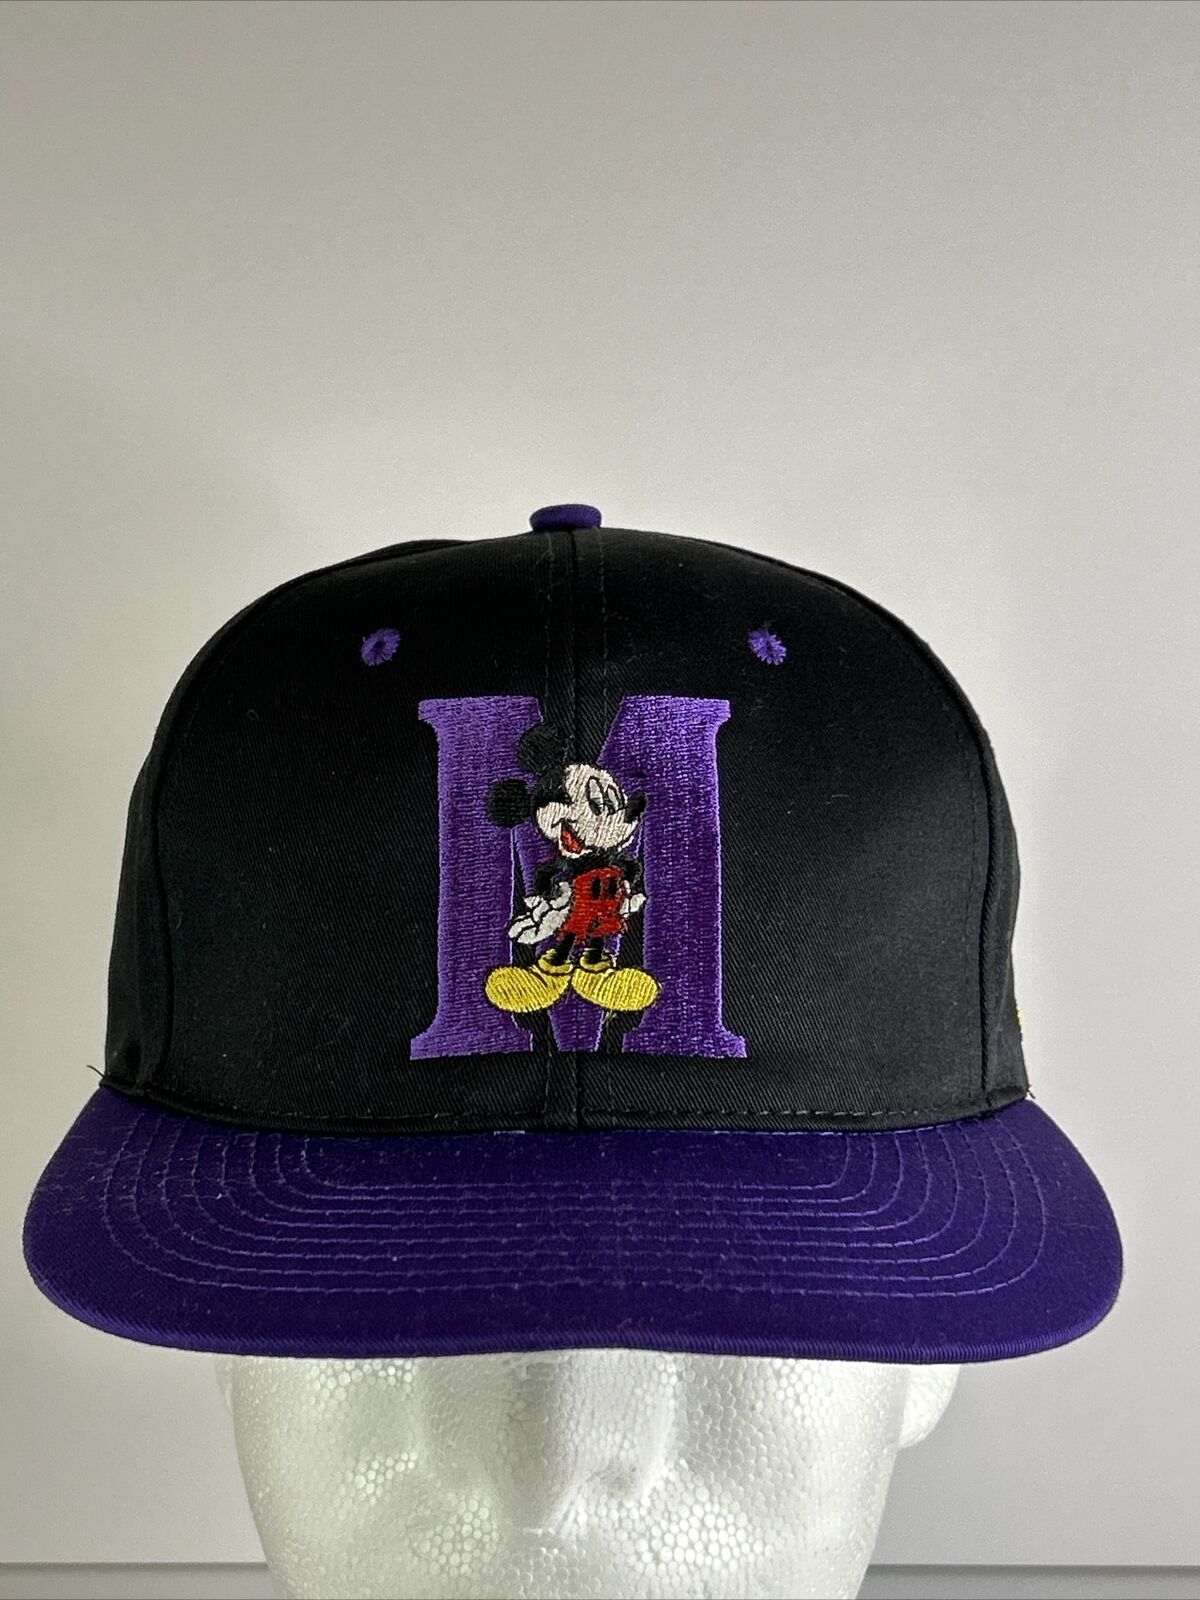 Vintage Disney Hat Cap Snap Back Blockhead Embroidered Block M Mickey Mouse